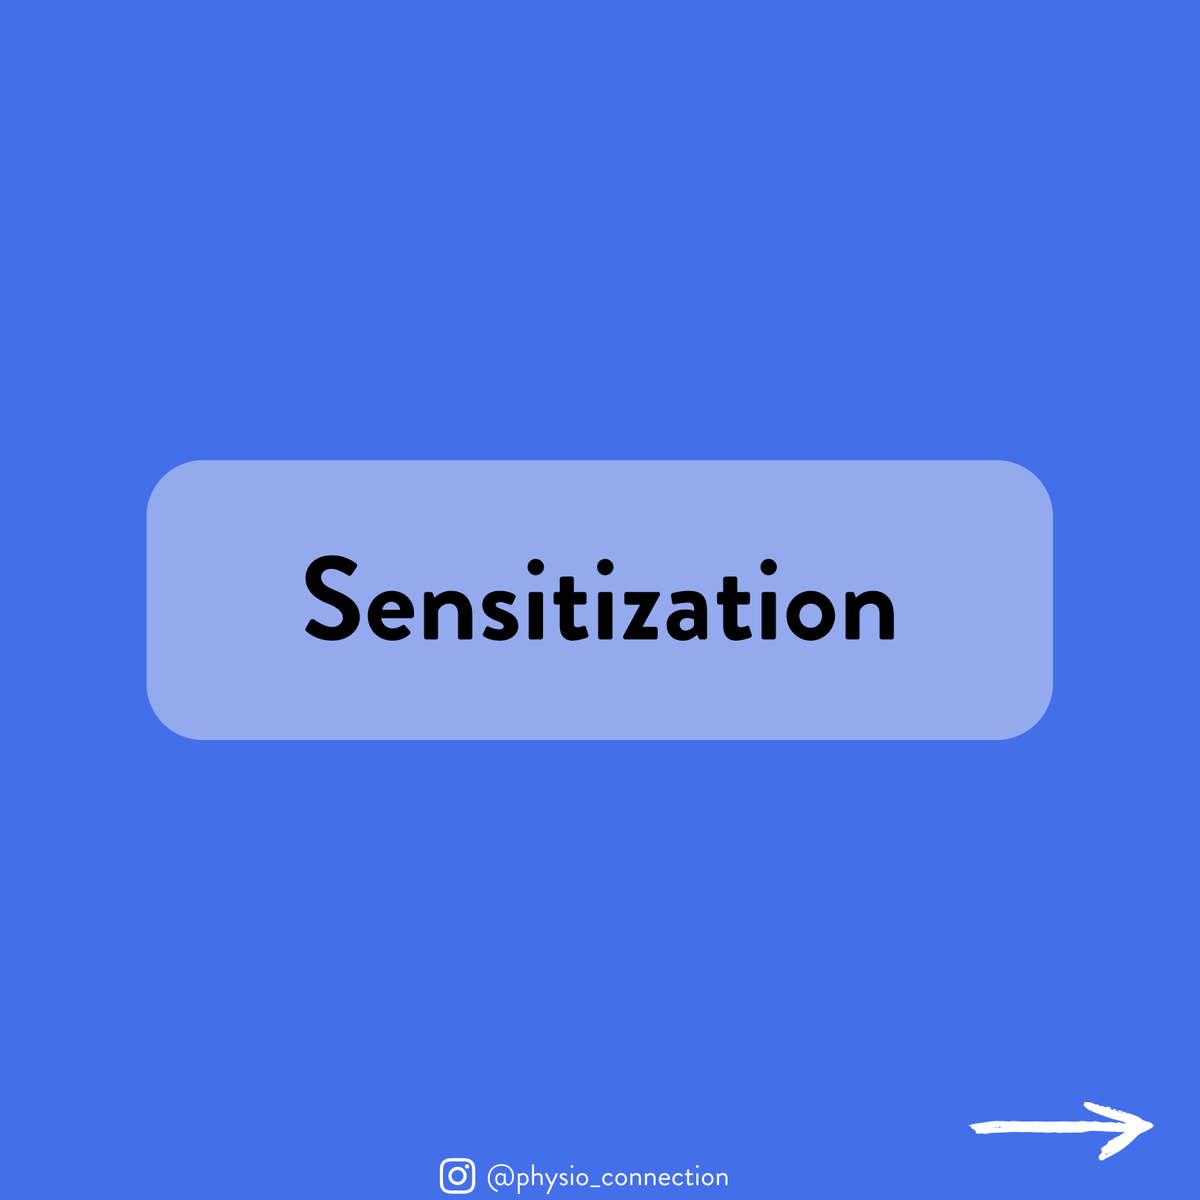 Sensitization. A term often used in pain management but what is it exactly?